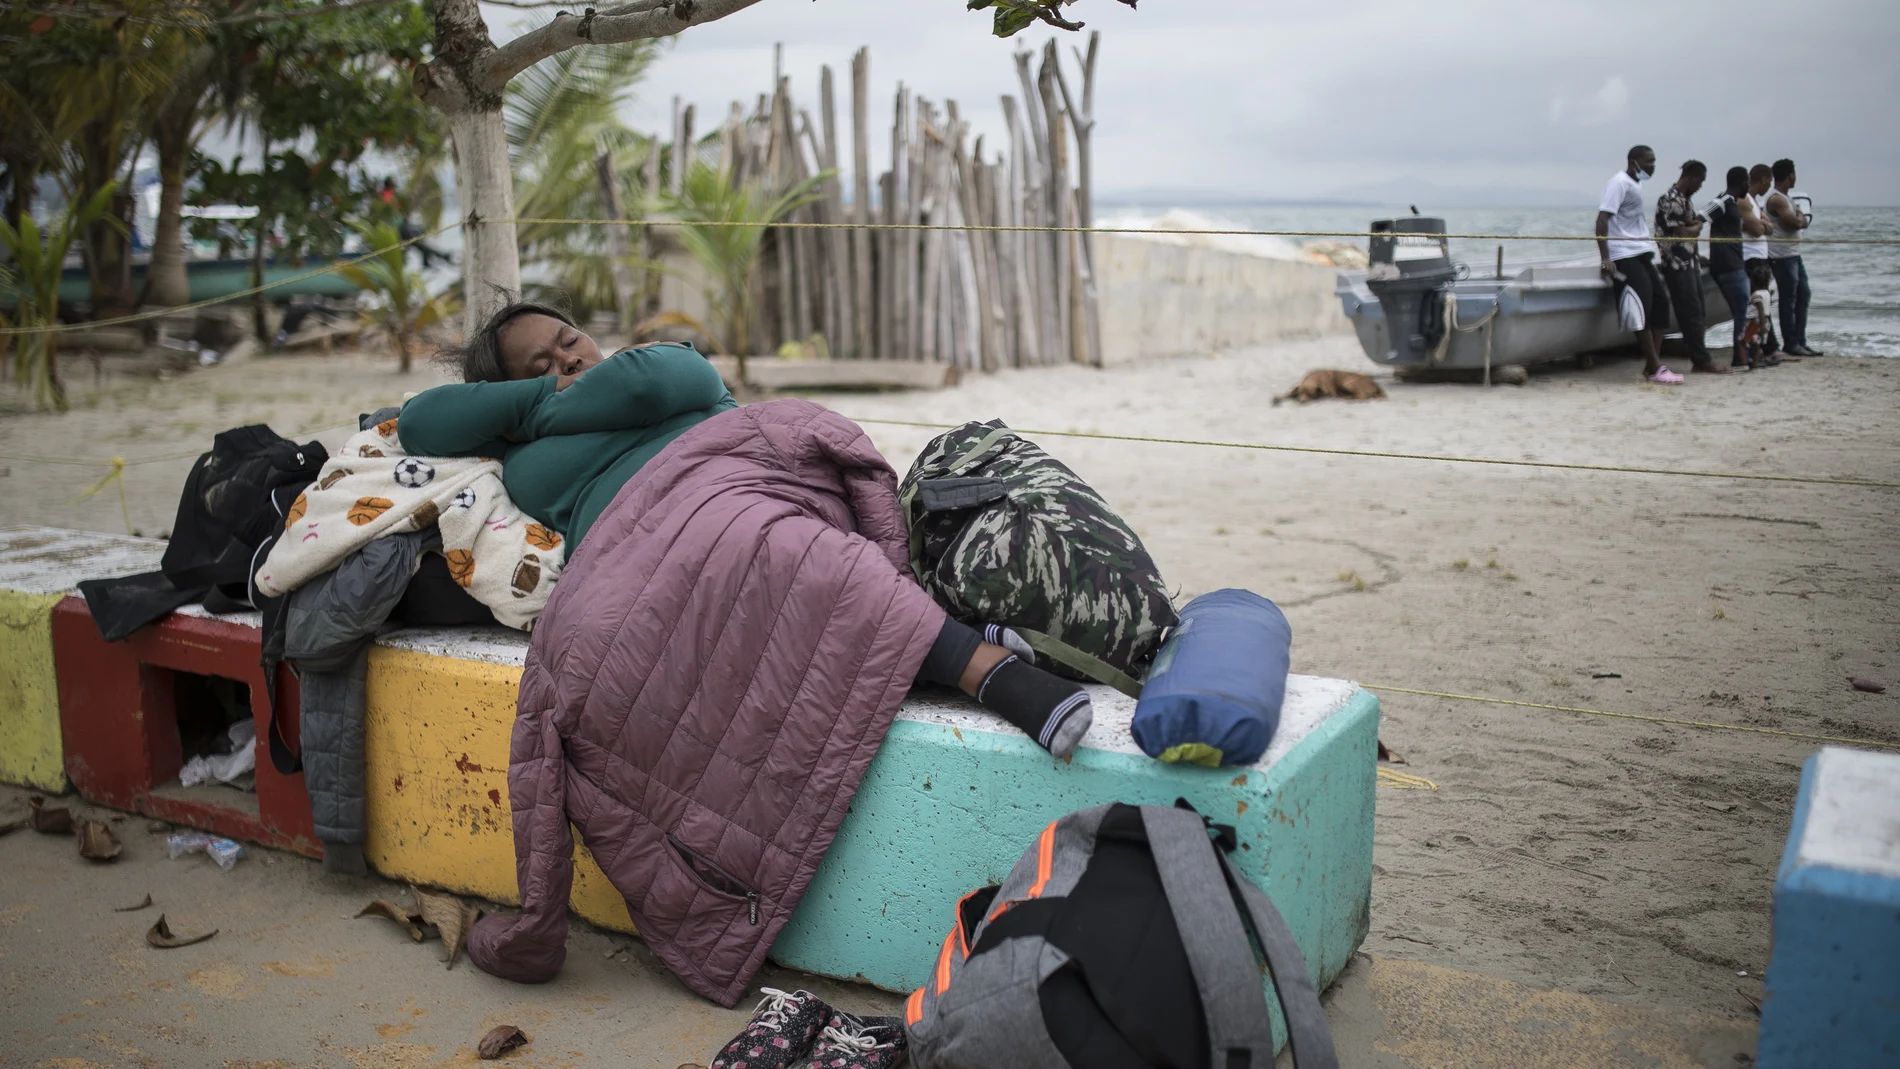 A migrant woman sleeps on a cement bench near the beach in Necocli, Colombia, Thursday, July 29, 2021. Migrants have been gathering in Necocli as they move north towards Panama on their way to the U.S. border. (AP Photo/Ivan Valencia)